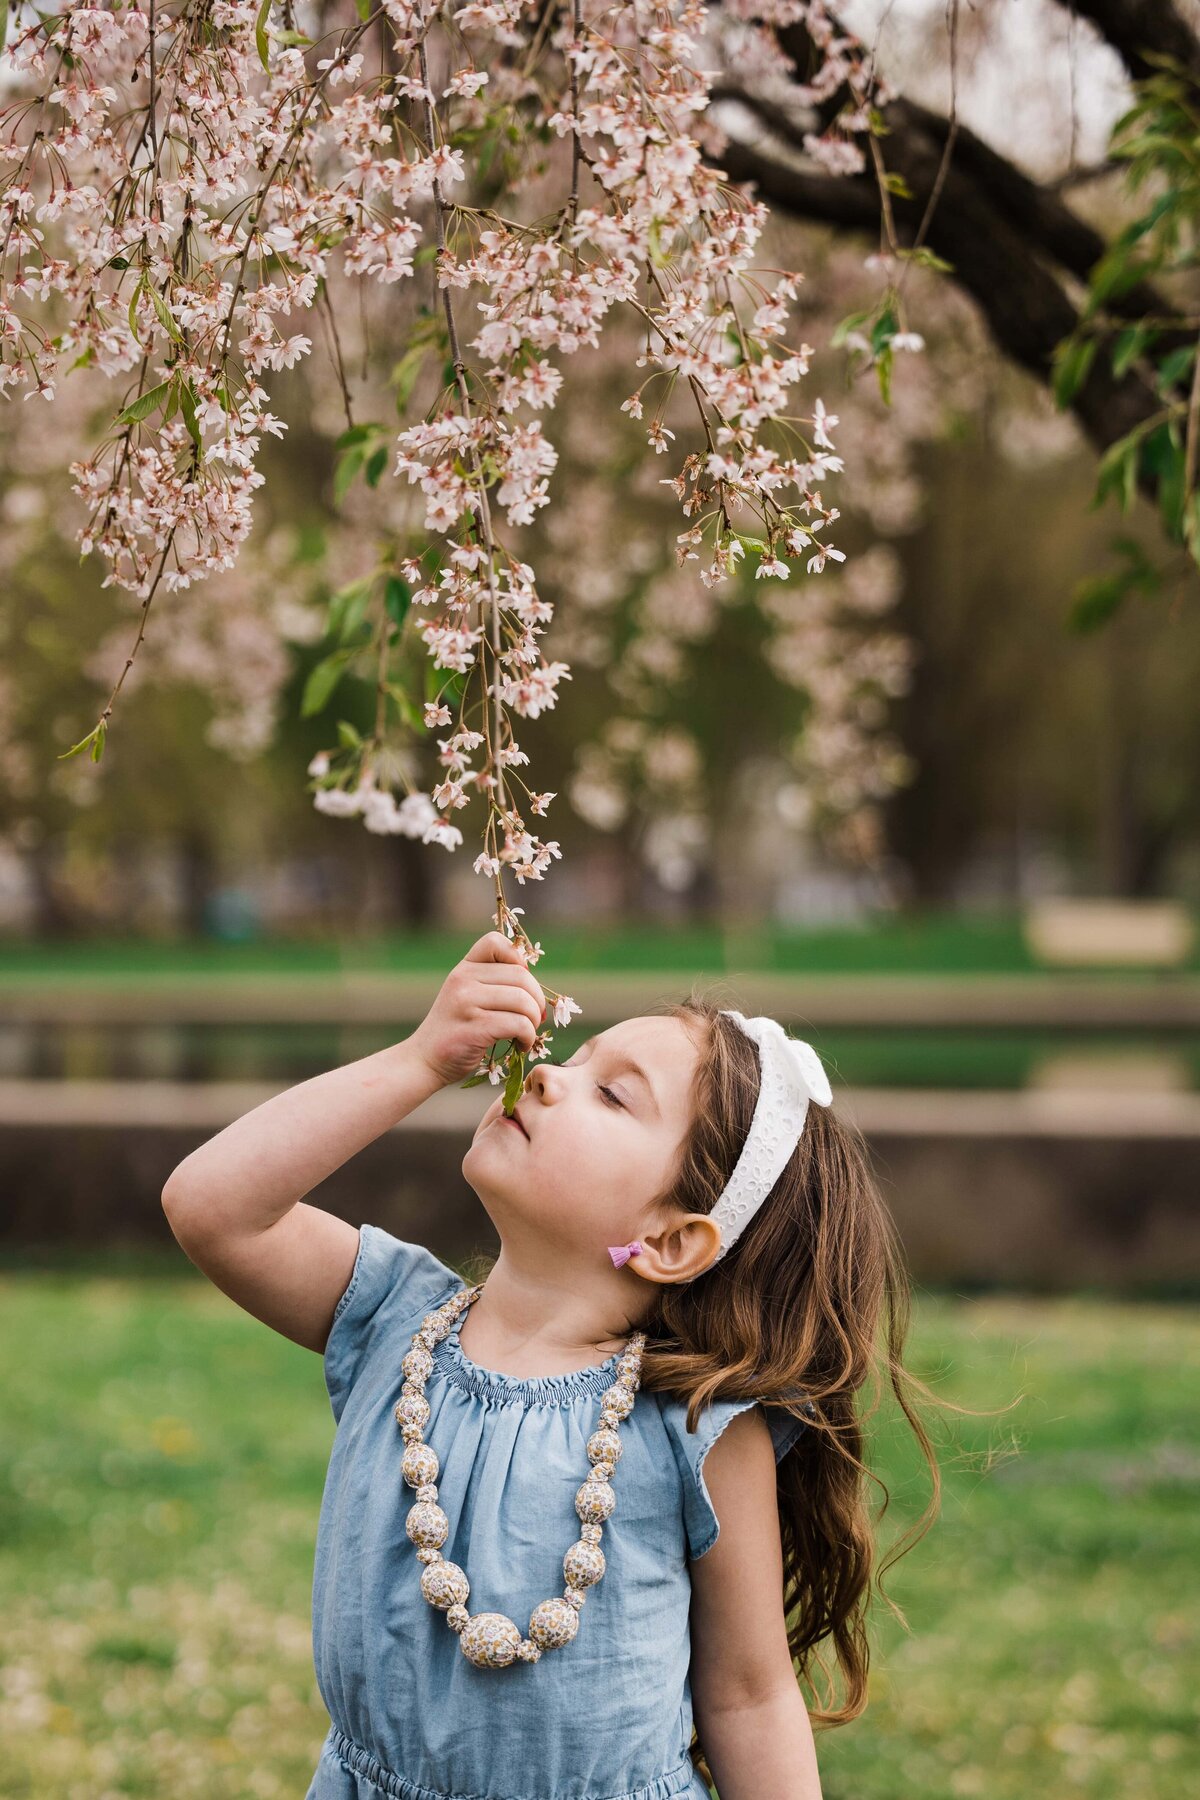 A girl smelling cherry blossoms in a park, captured by a talented family photographer in Pittsburgh.